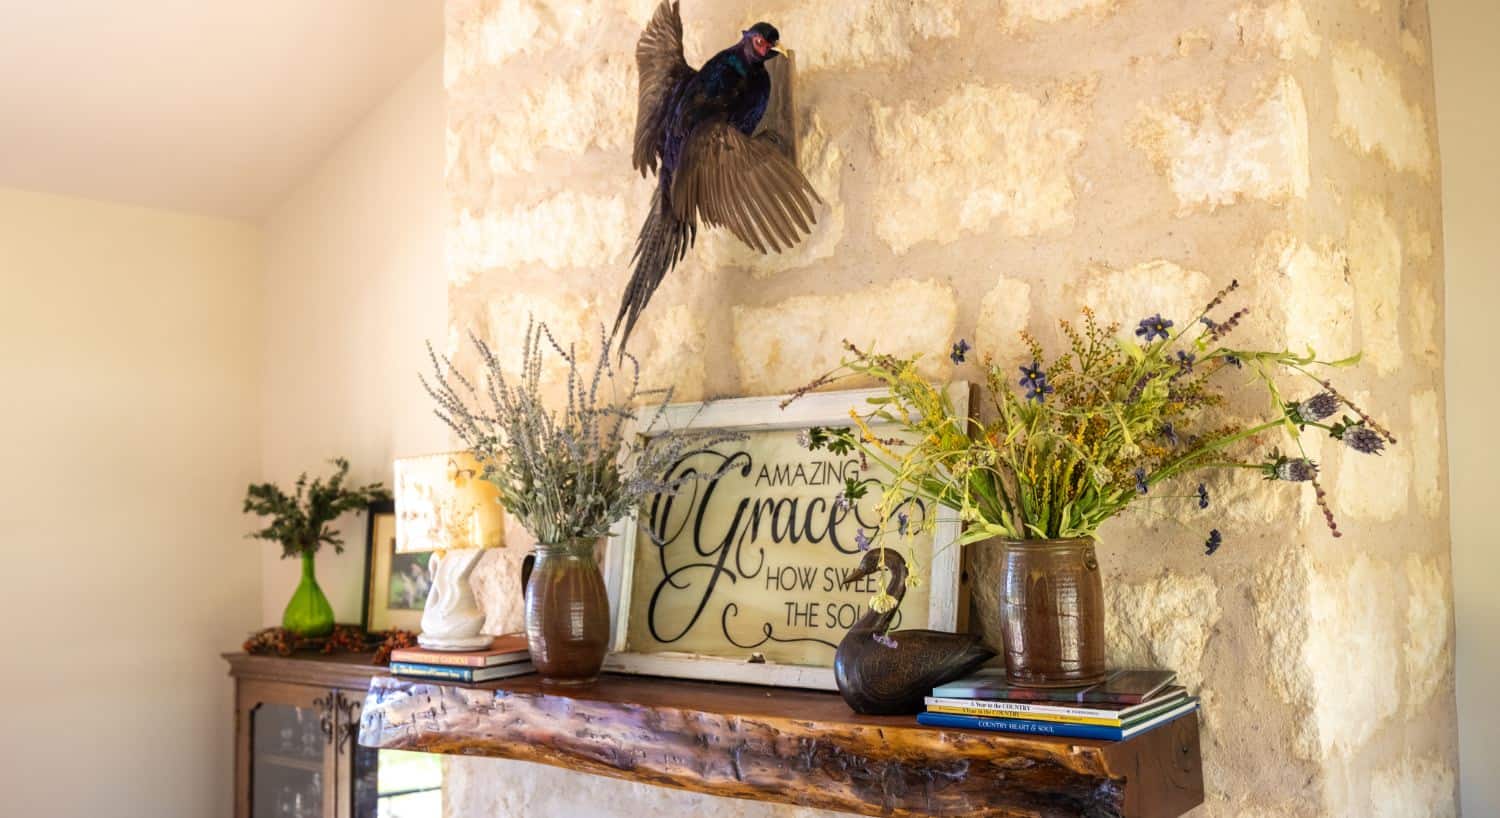 Wooden mantel over a stone fireplace with vases of flowers, books, a lamp, and a sign which says Amazing Grace How Sweet the Sound